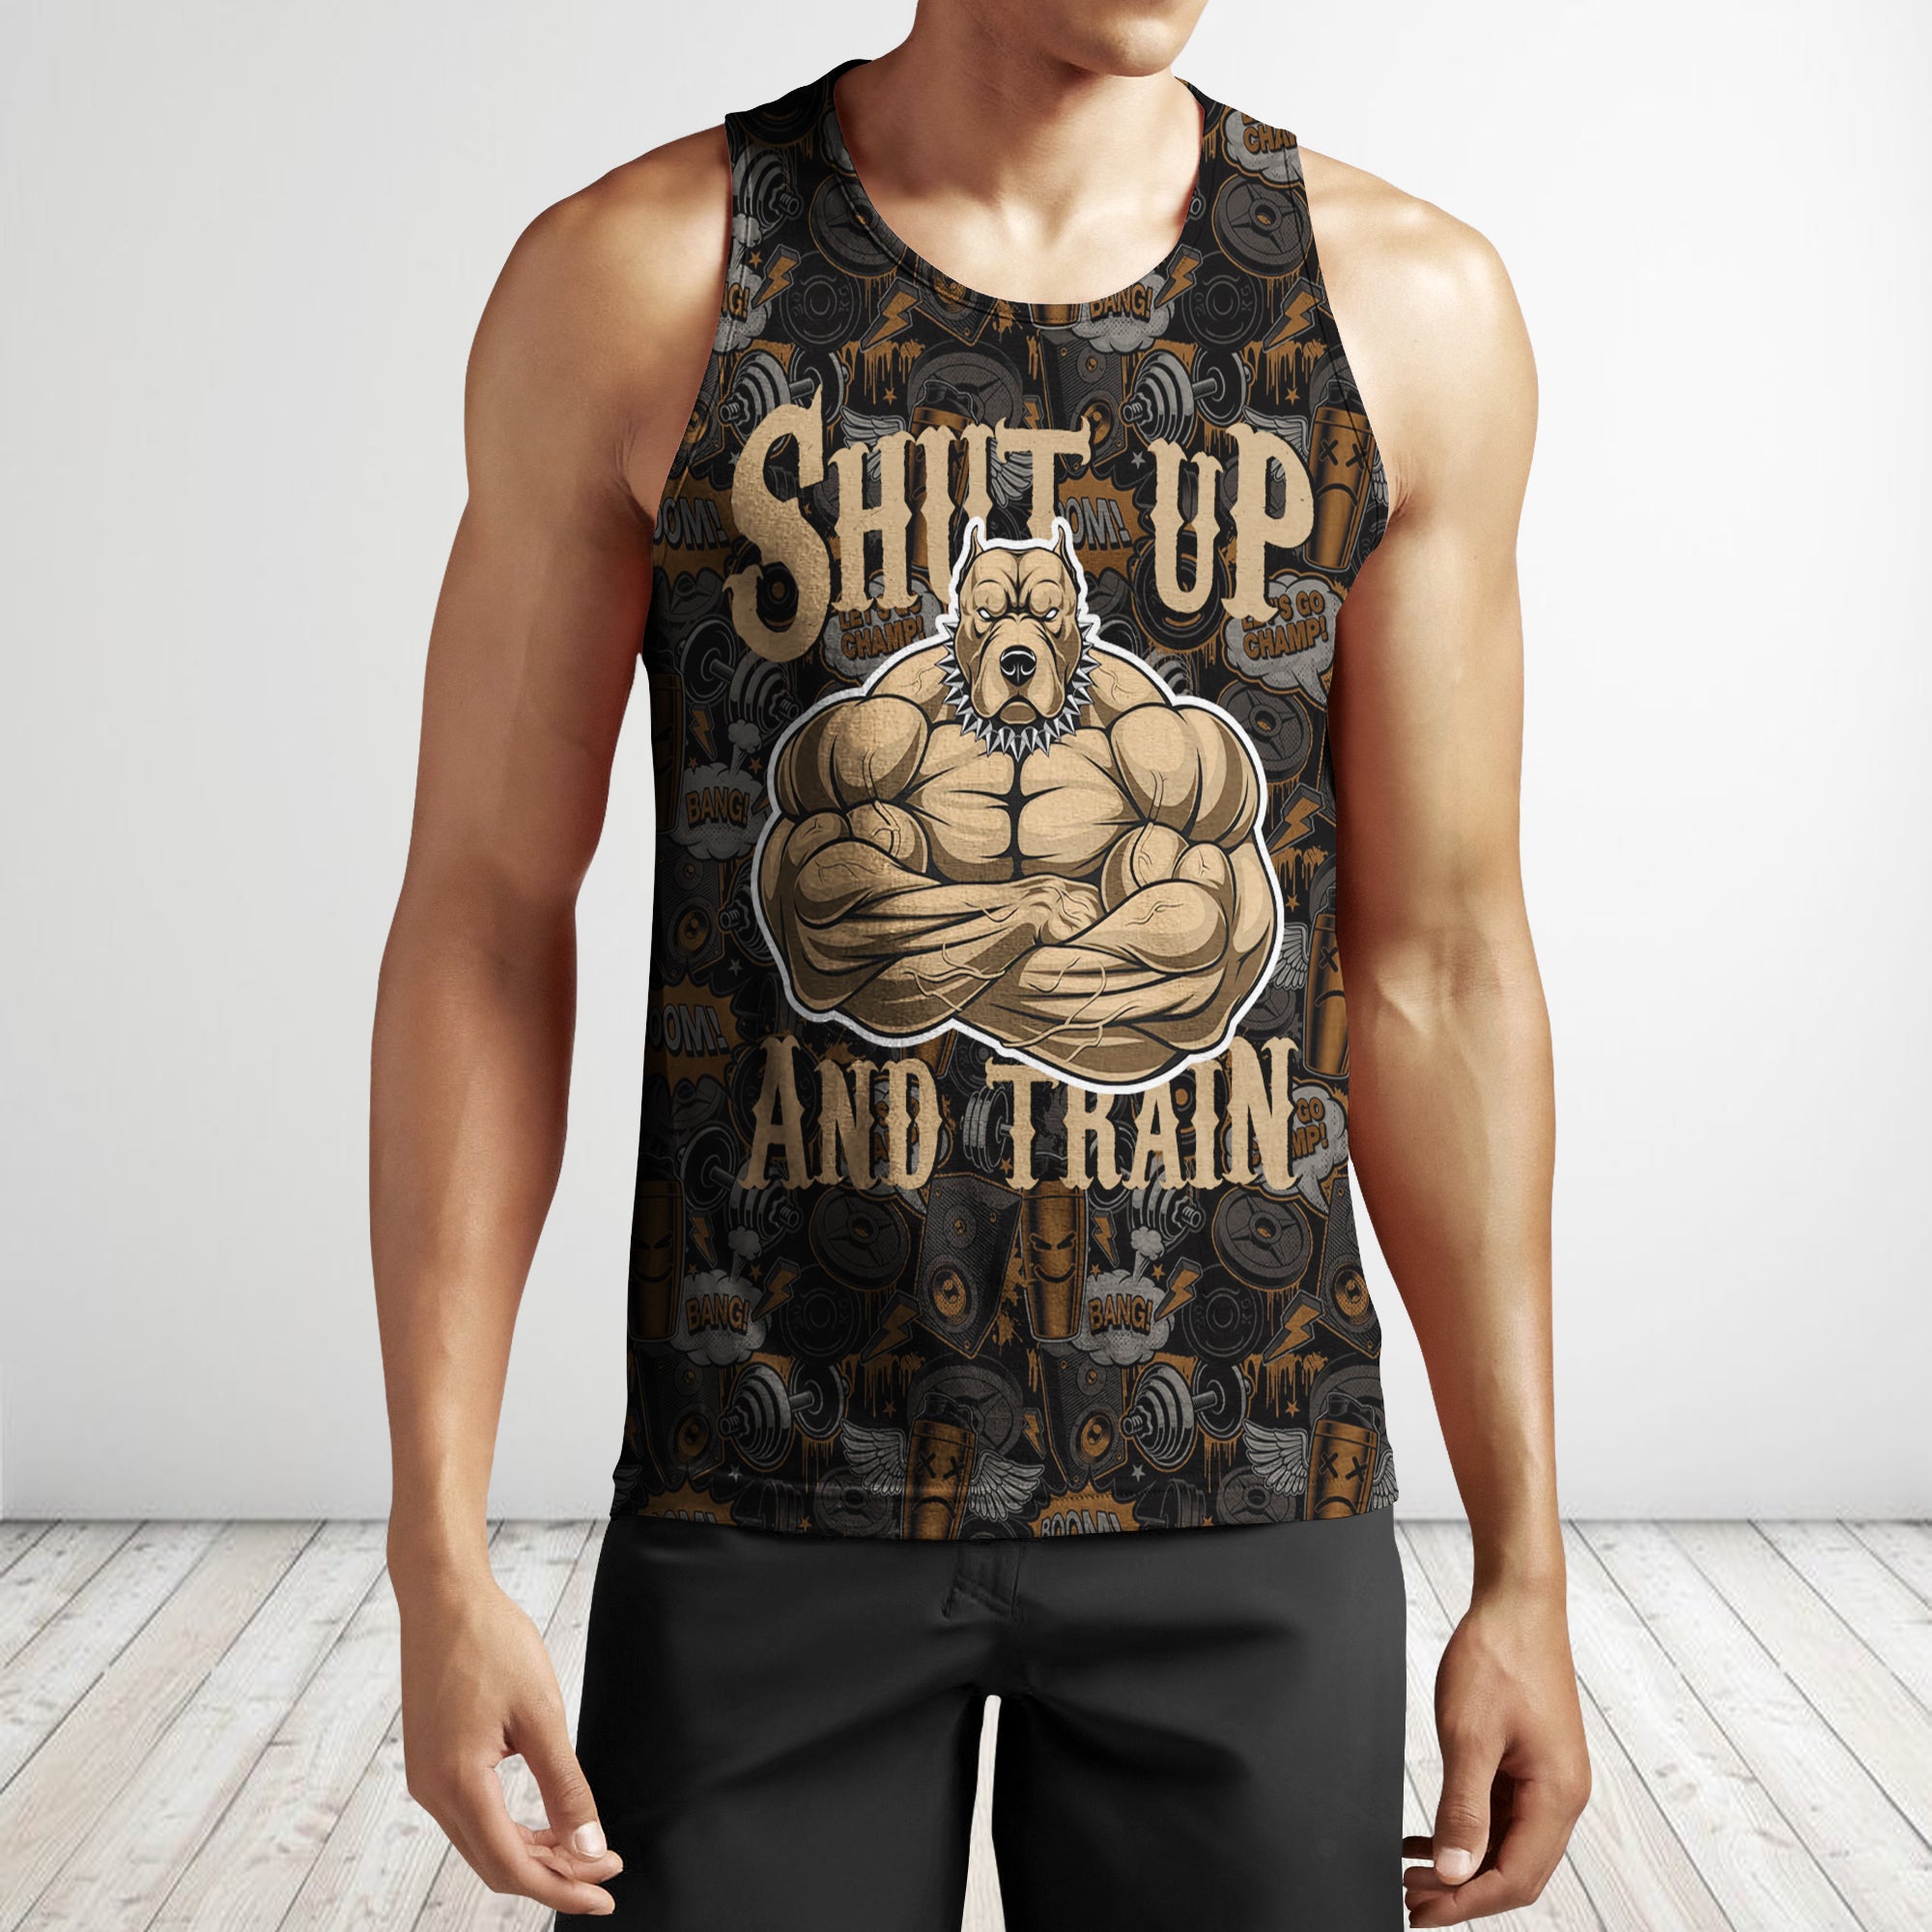 Funny Workout Shirts, Tank Tops With Sayings, Mens Workout Tank Tops, Mens  Gym Tank, Worlds Okayest Muscles, Funny Tank Tops for the Gym -  Canada